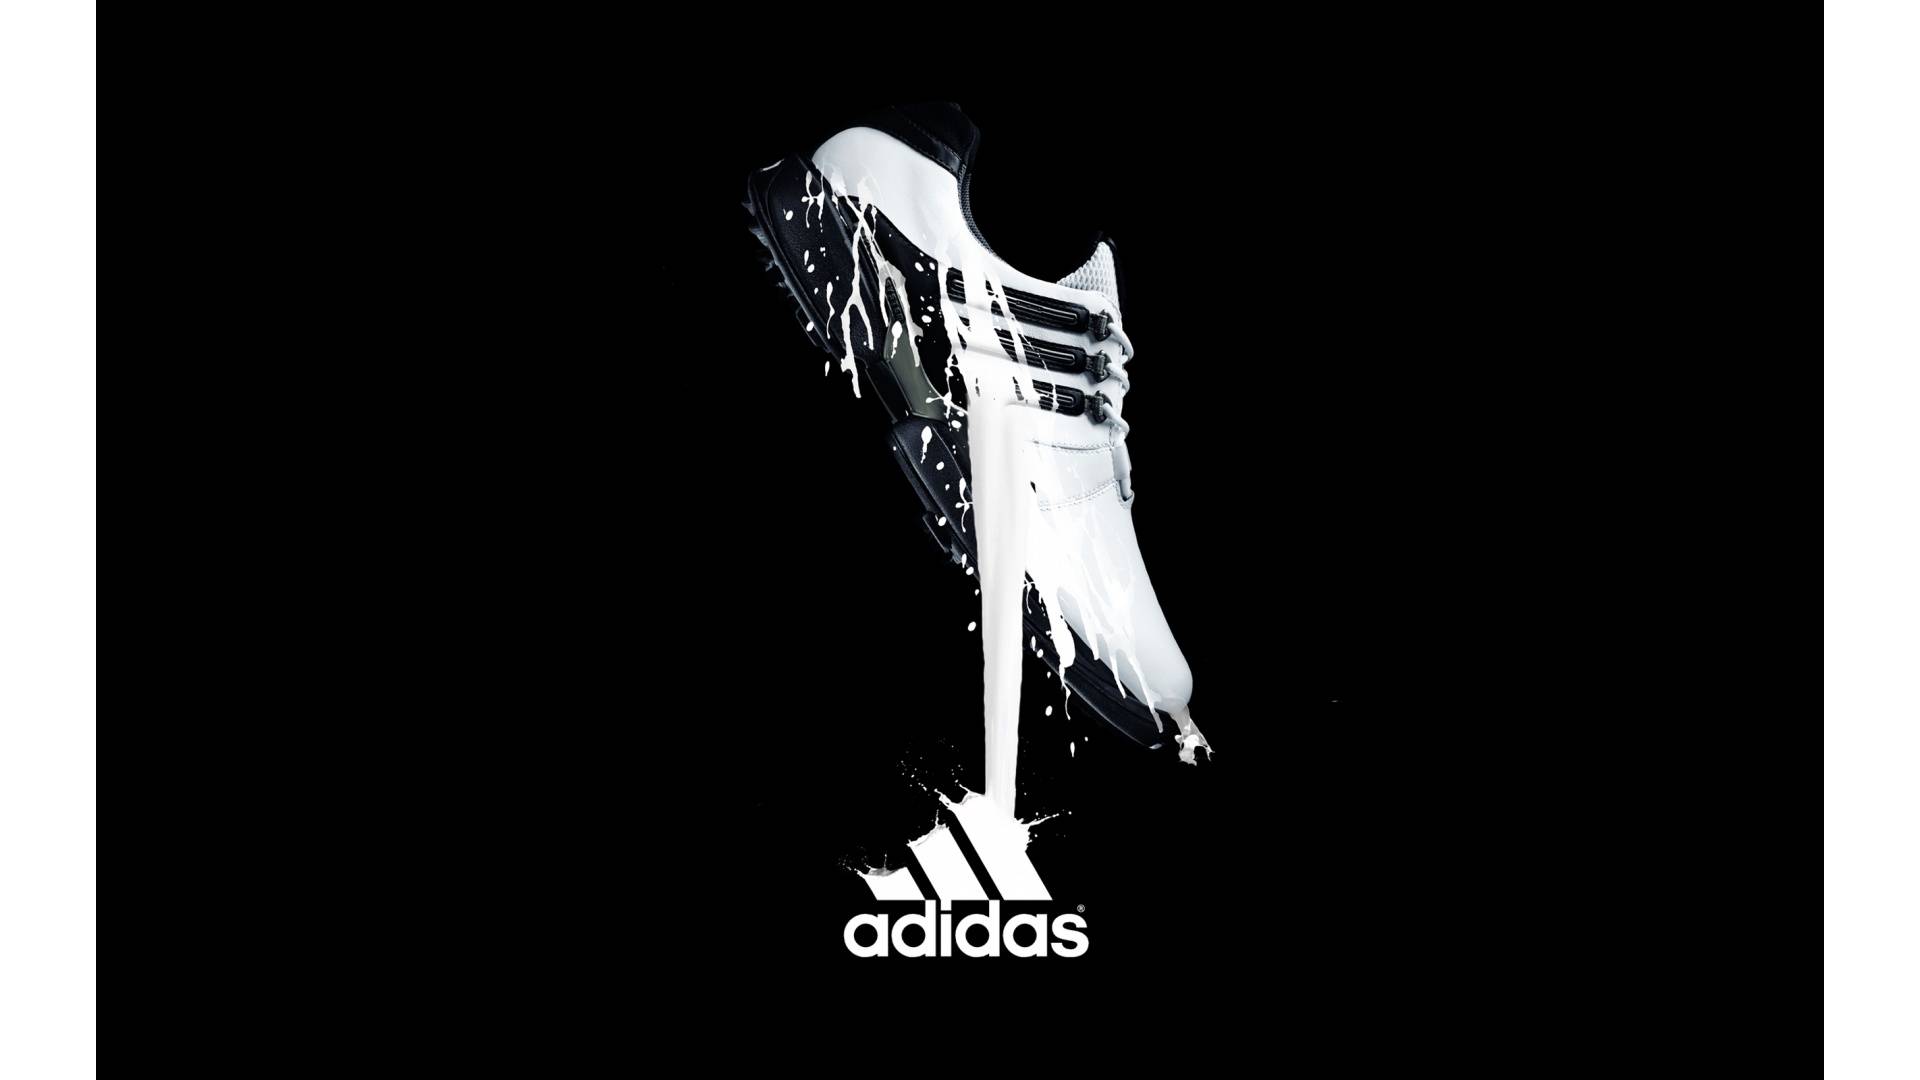 Adidas Logo Backgrounds HD Wallpapers